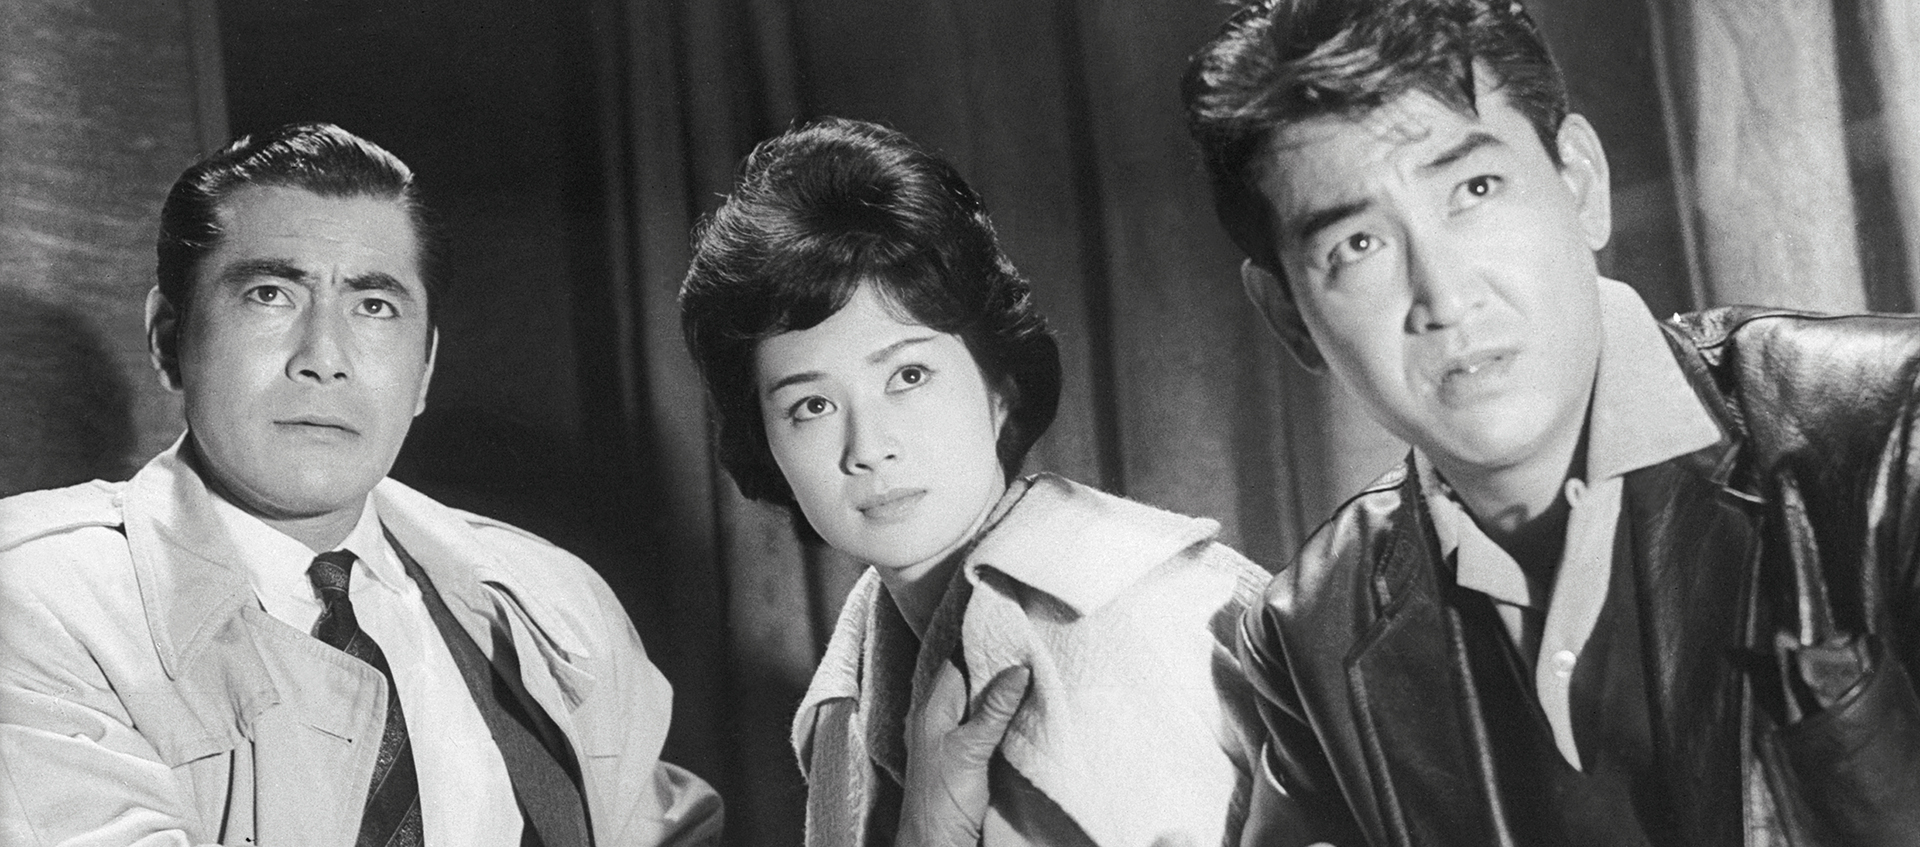  Black-and-white still of three people looking intently at something; the person on the left has short, slicked-back dark hair and is wearing a suit, tie, and trench coat; the person in the middle has dark, short, voluminous hair and is wearing gloves and a light-colored jacket; the person on the right has short, dark hair and is wearing a black leather jacket. 